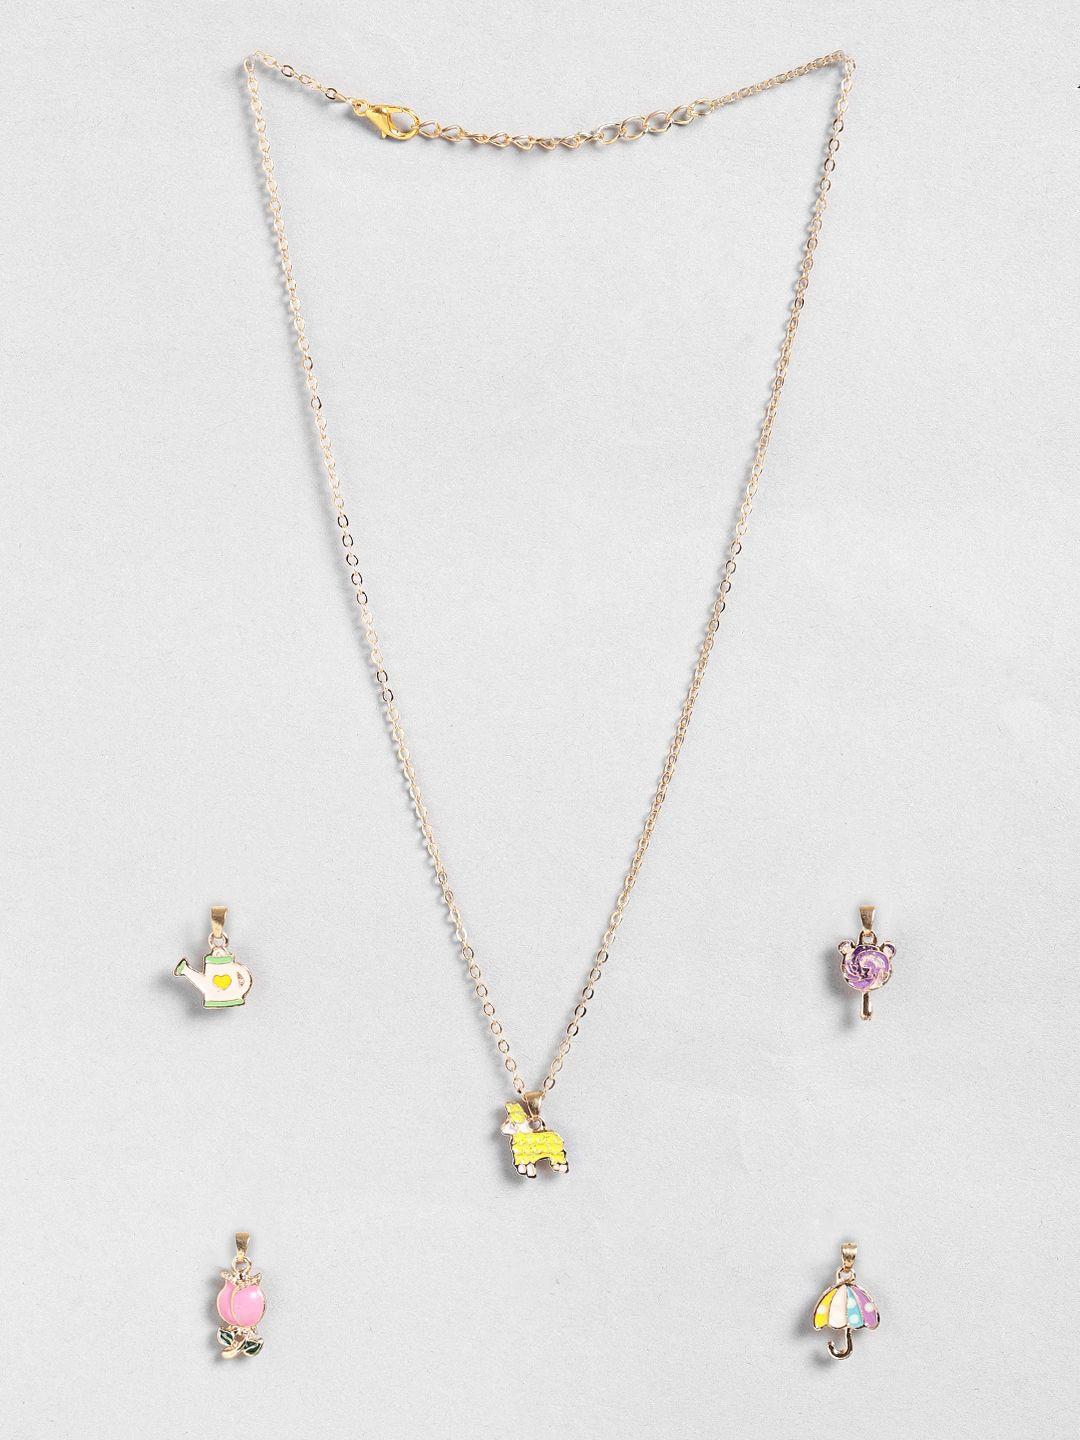 el regalo girls set of 5 charm pendants with chain